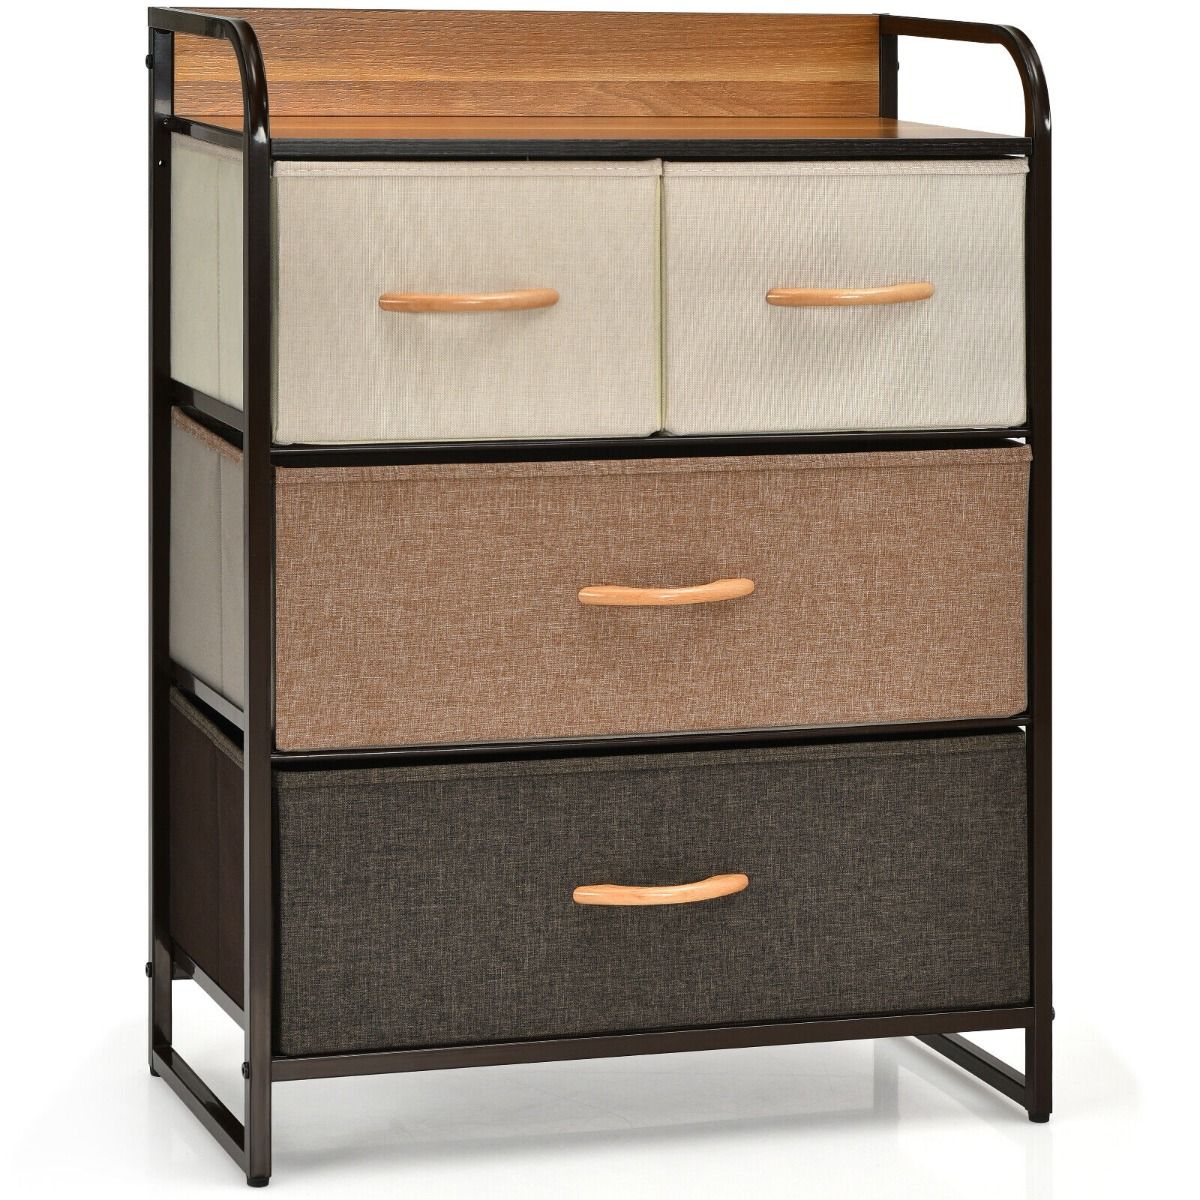 Vertical Dresser Storage Tower with Wooden Top and 4-5 Drawers 